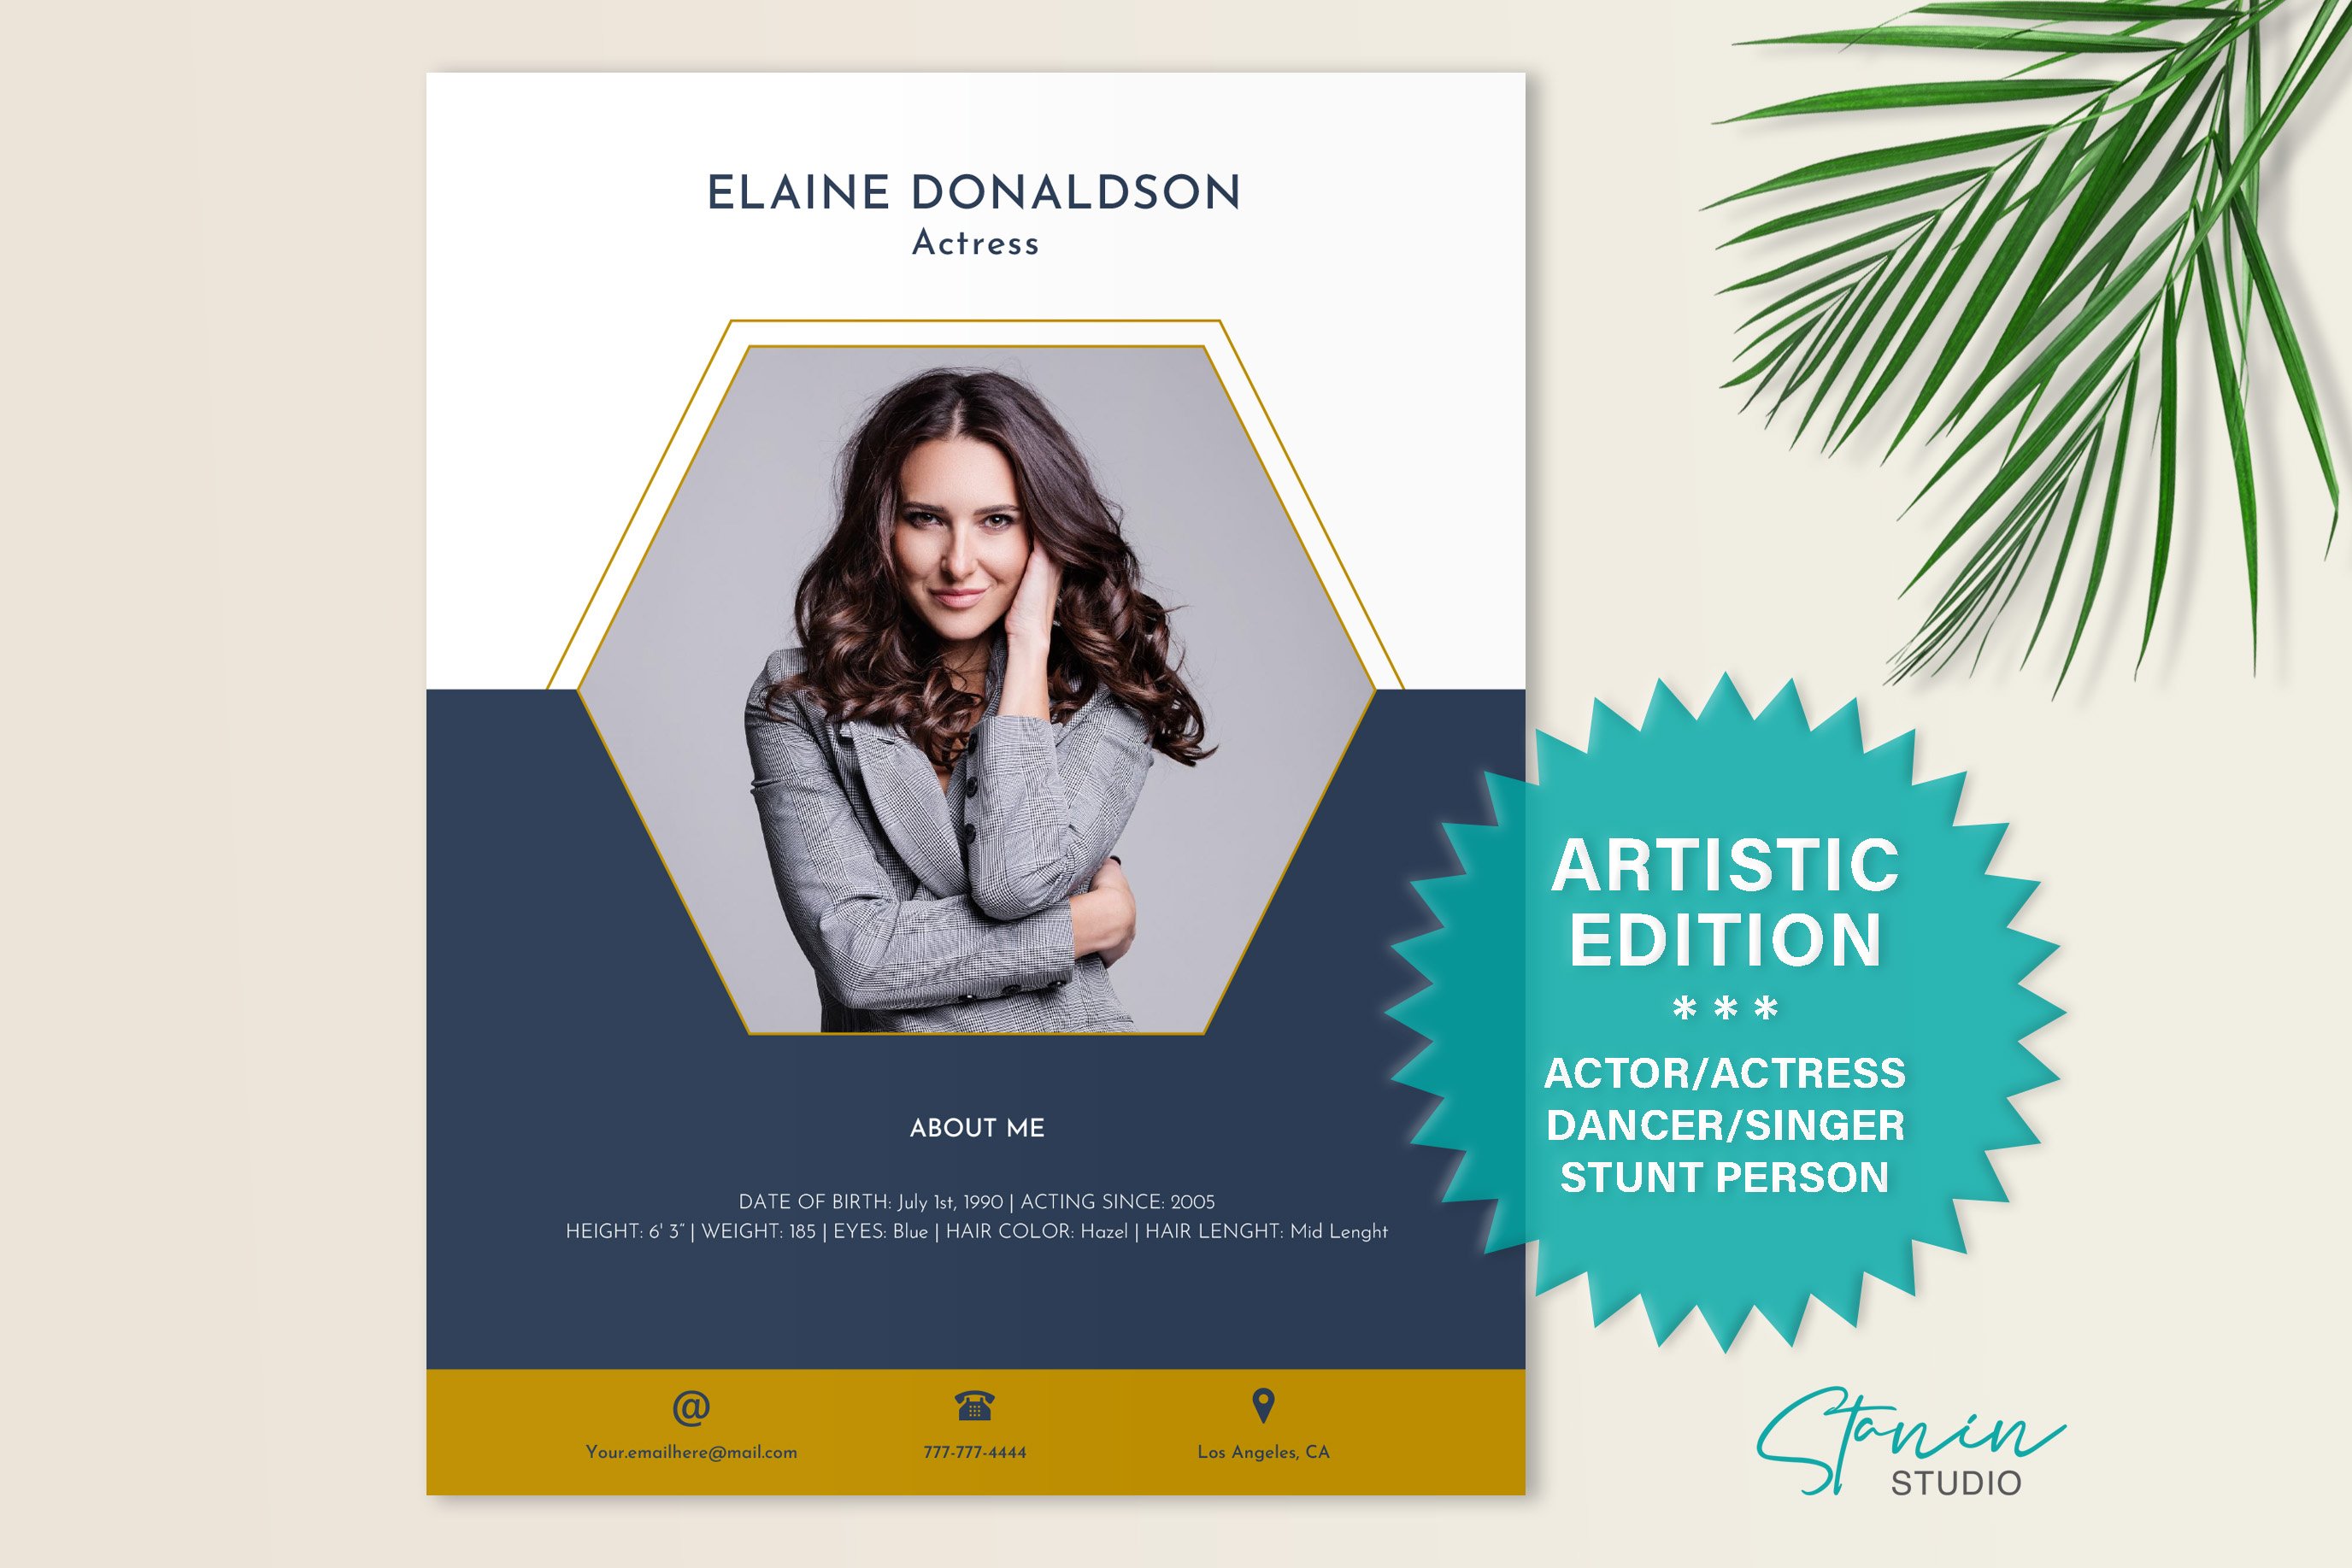 Resume Template for Actor, Actress cover image.